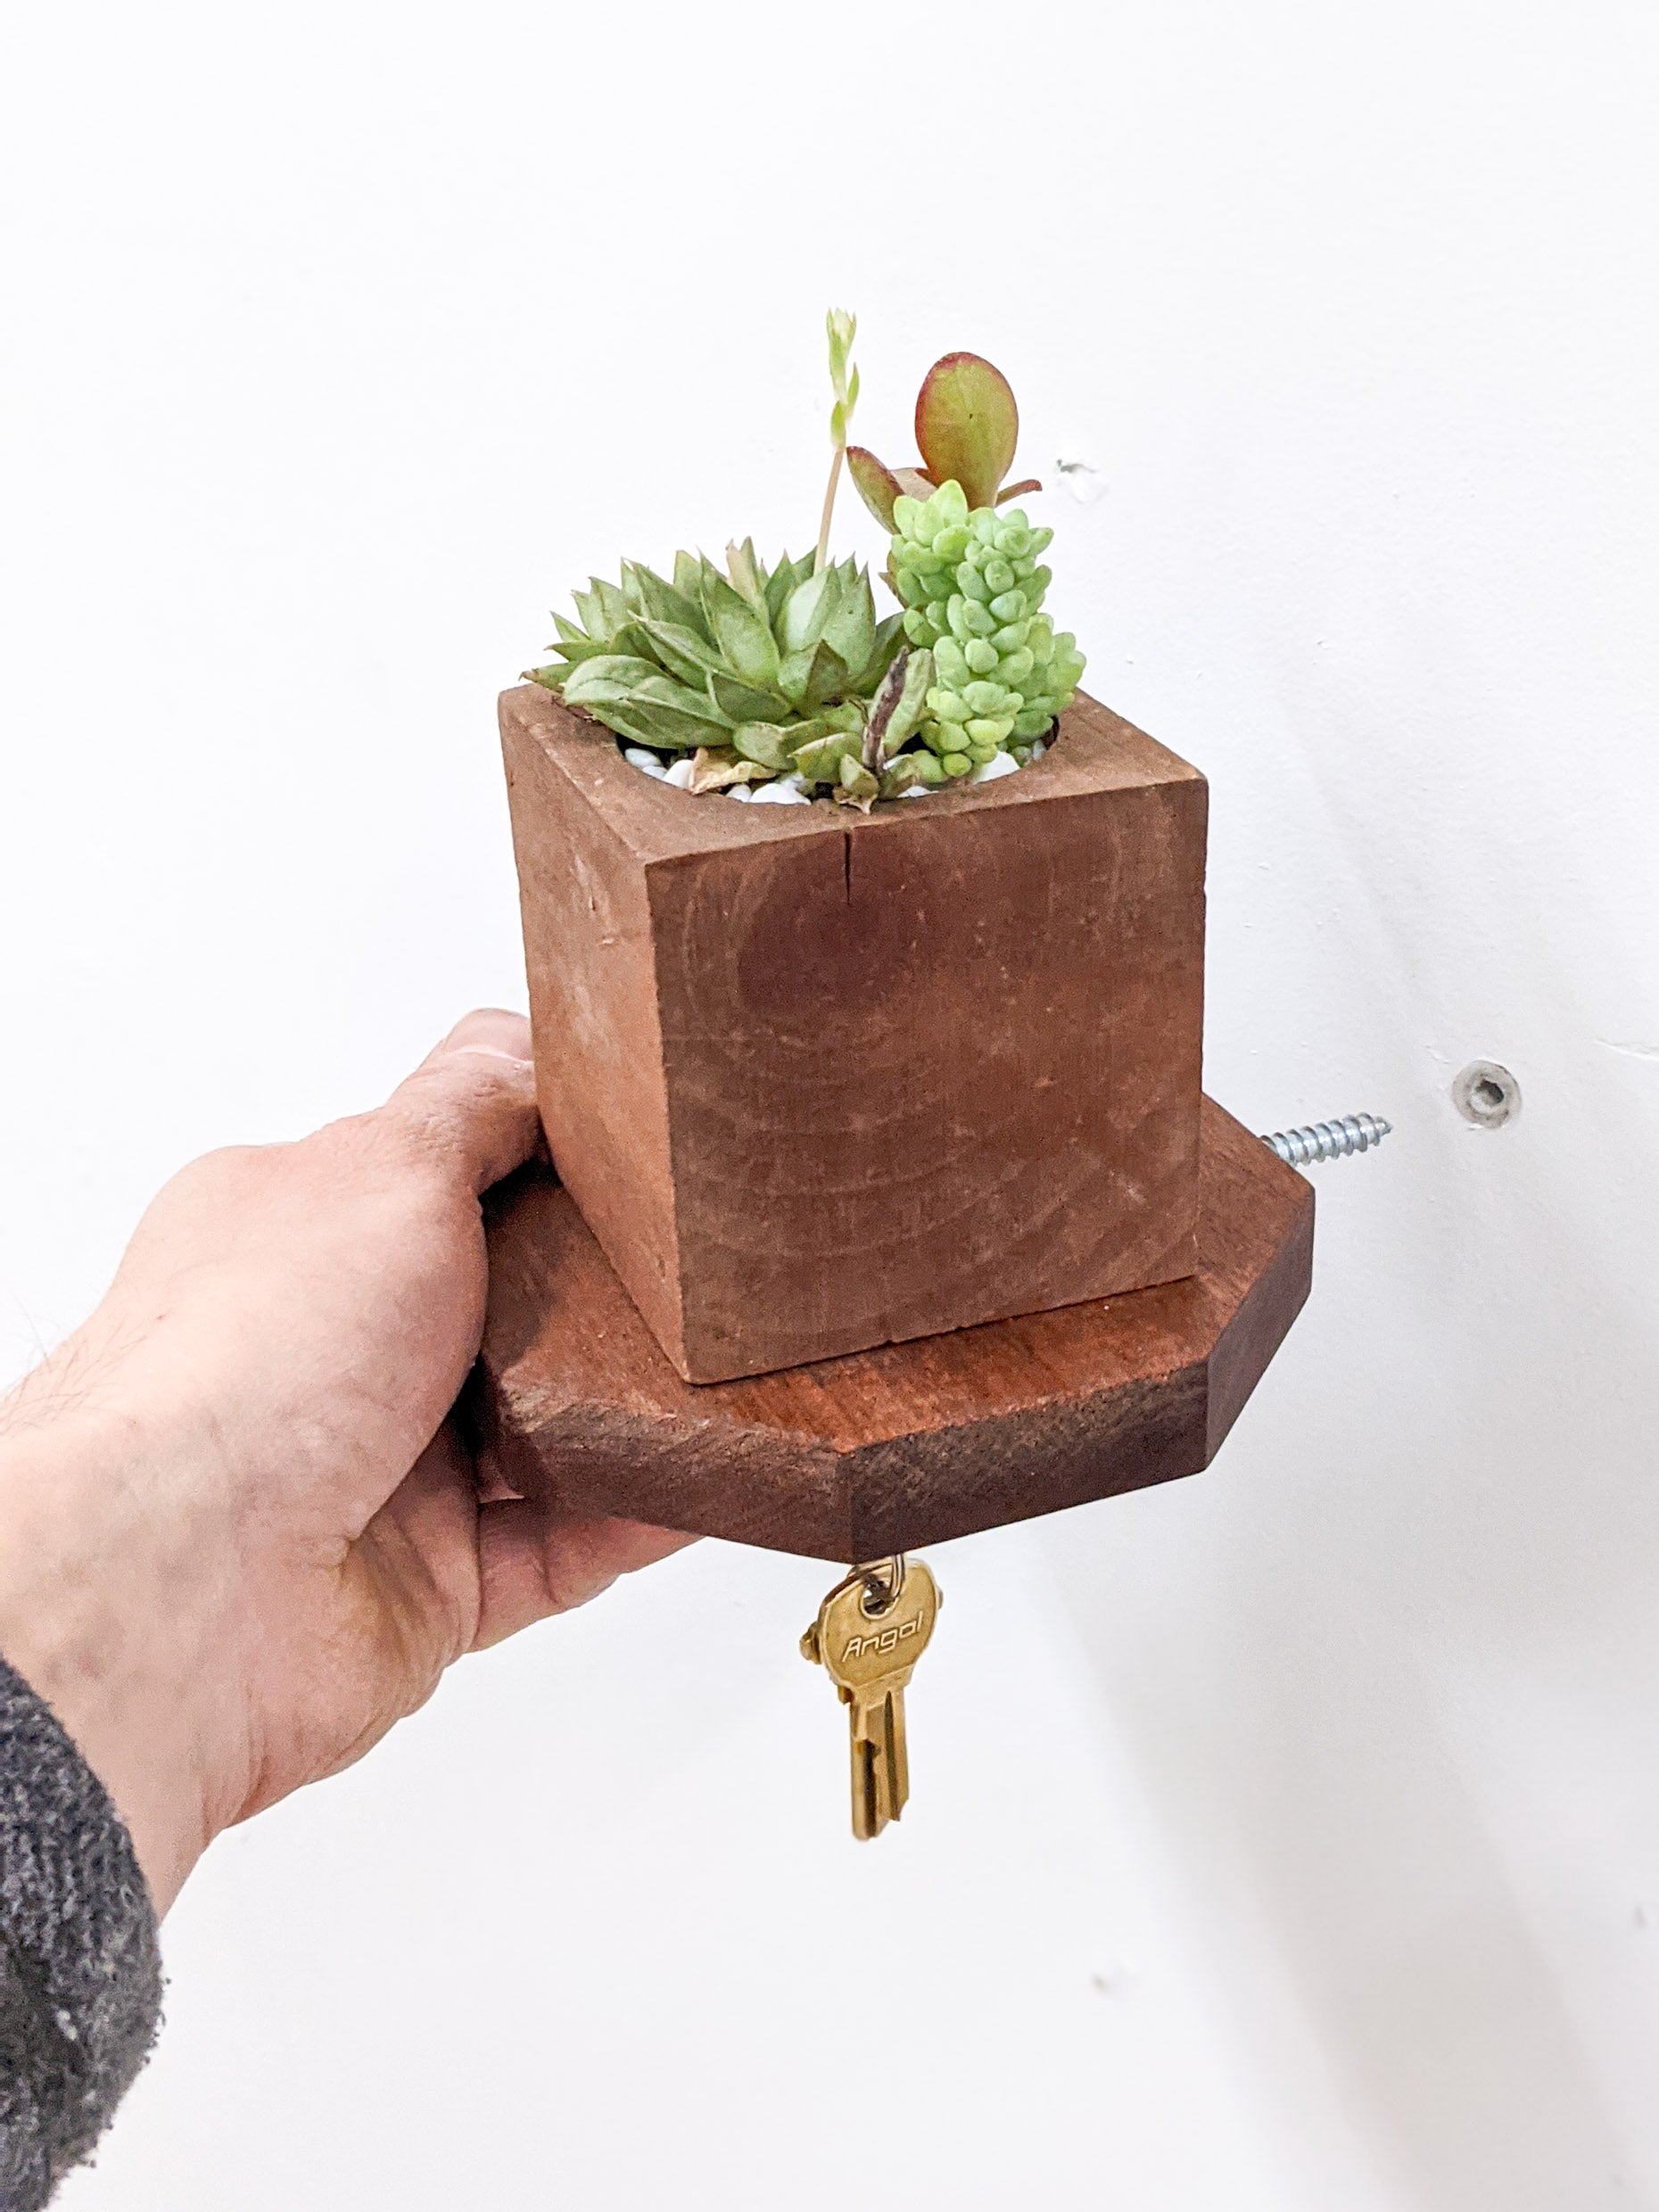 A side view of a hand holding our octagon key shelf in mahogany, extending towards the wall with the silver screw facing towards a drilled hole in the wall for installation. The sides of the octagon are straight with slightly beveled edges. On top, a square wooden planter holds three succulents. A singular bronze key dangles securely from the key hook below. 